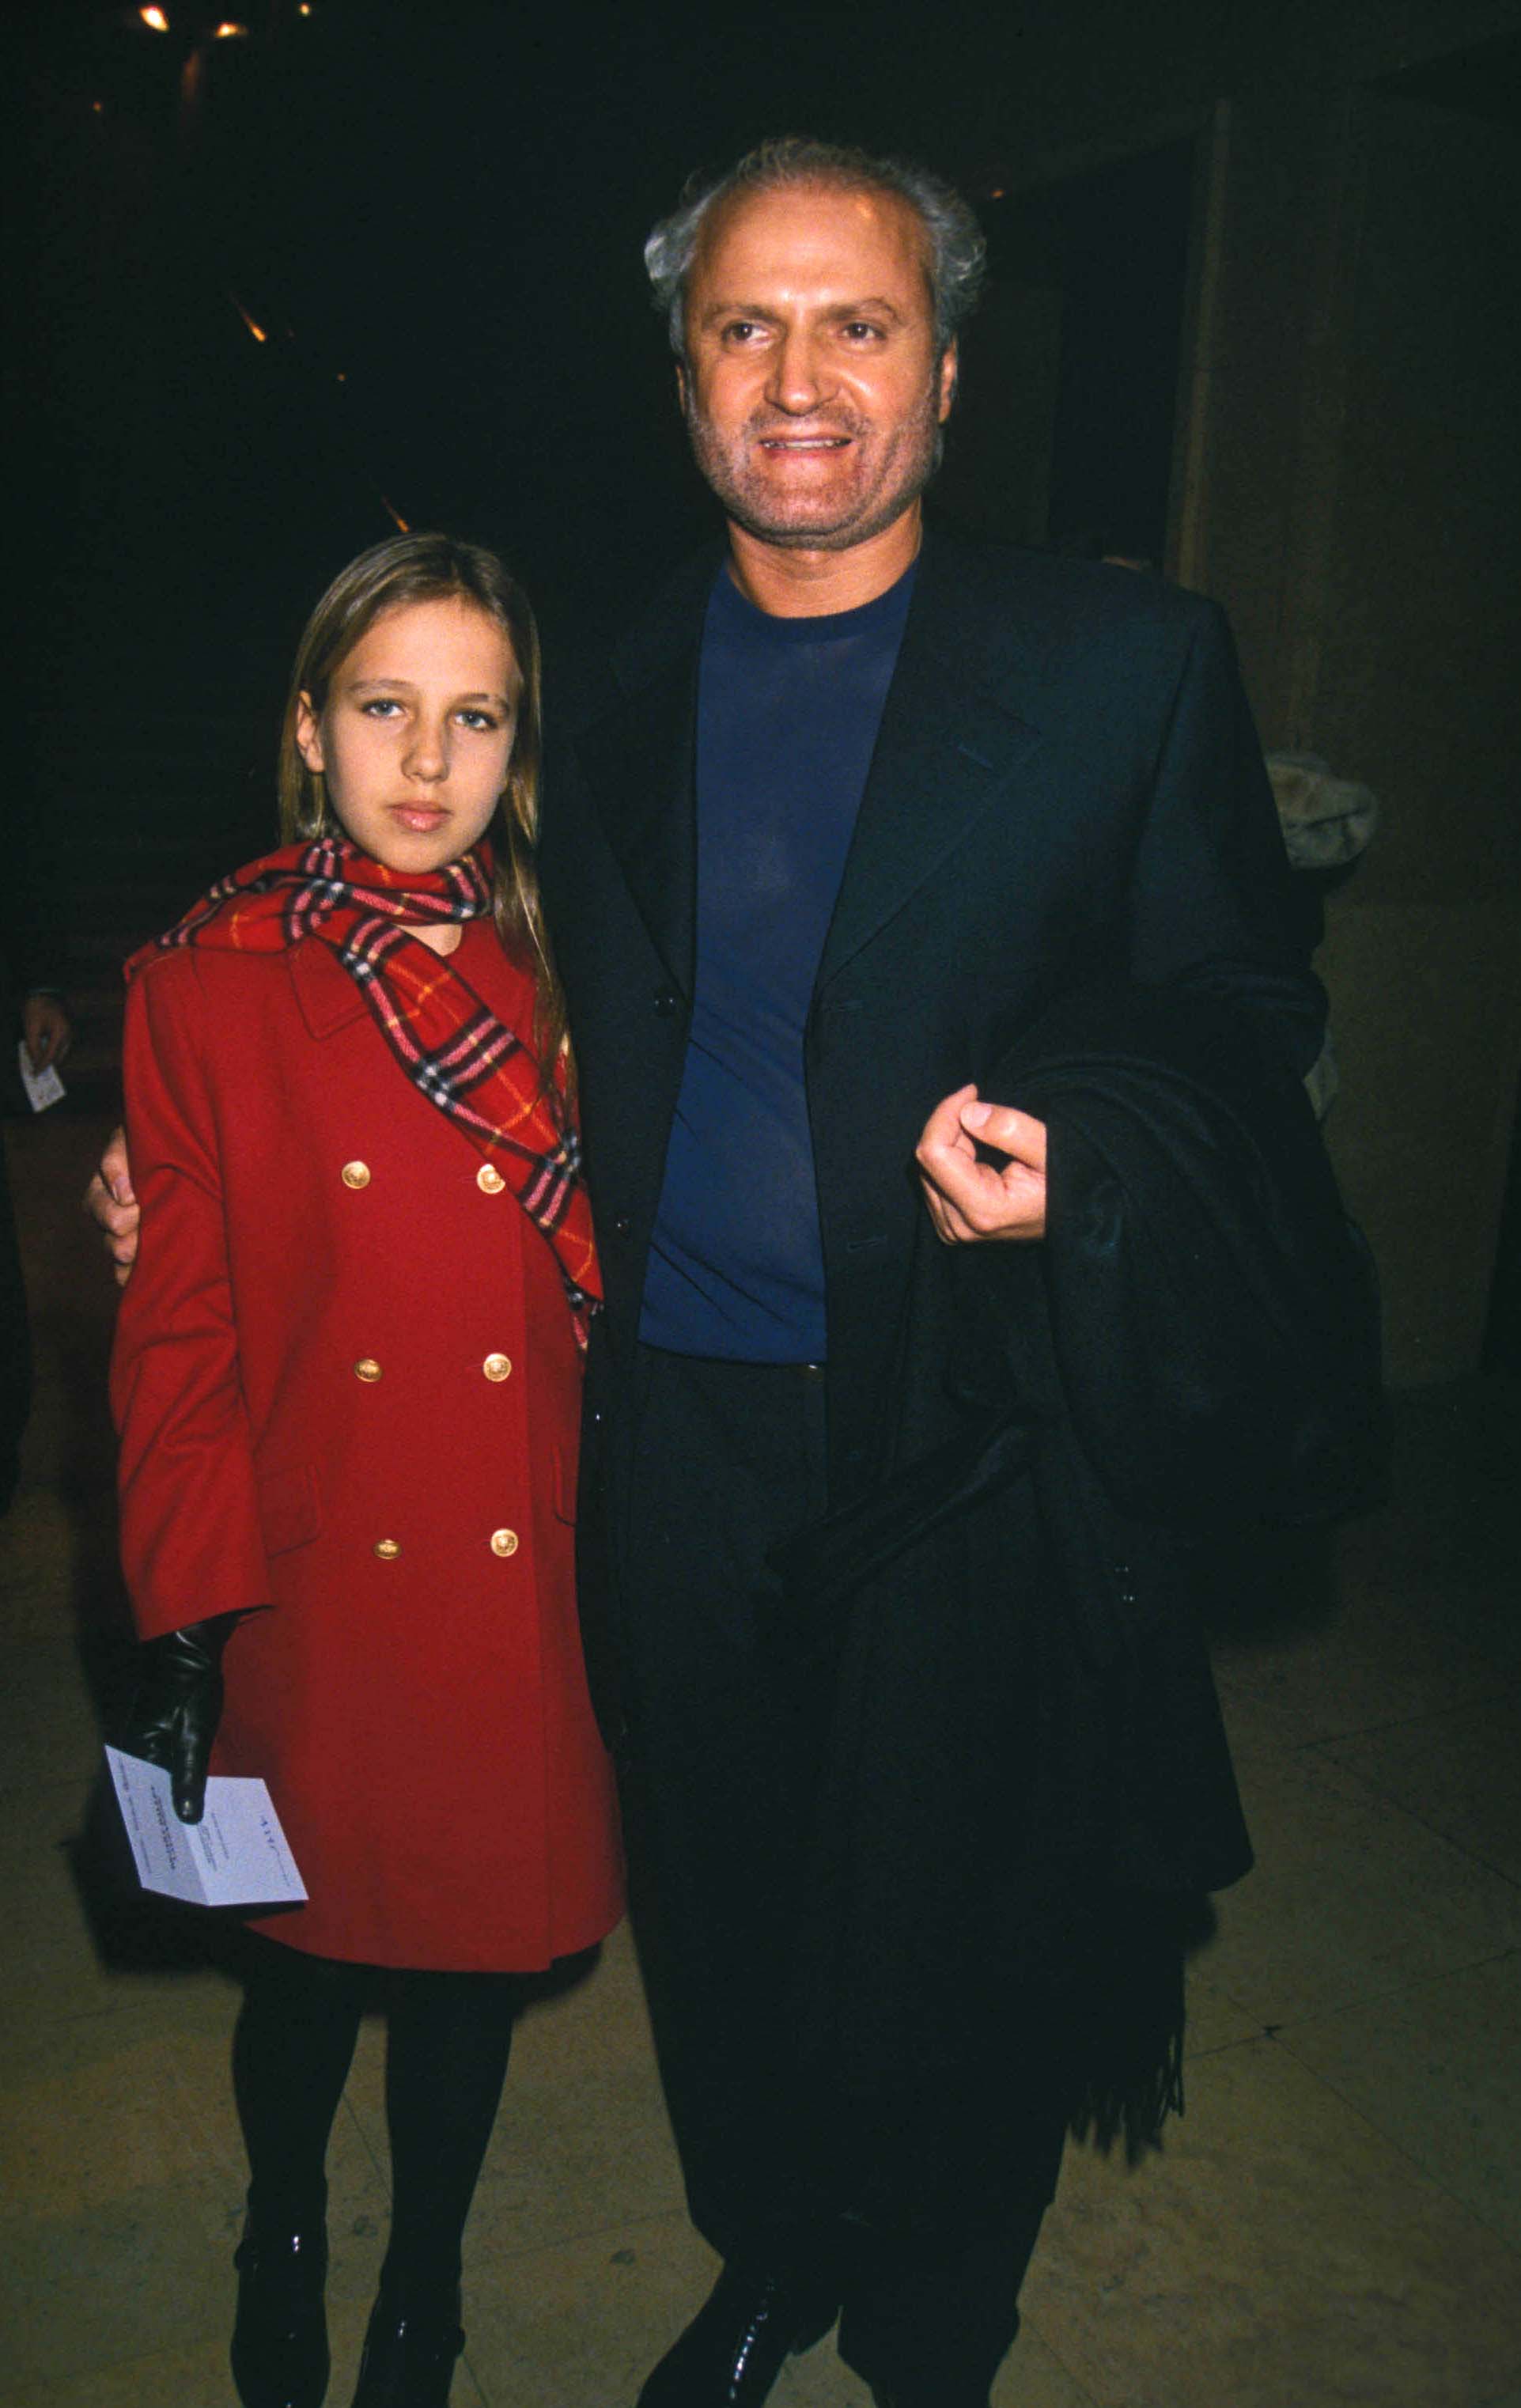 Allegra Versace and Gianni Versace at the Le Ballet Bejart in the UK circa 1991 | Source: Getty Images